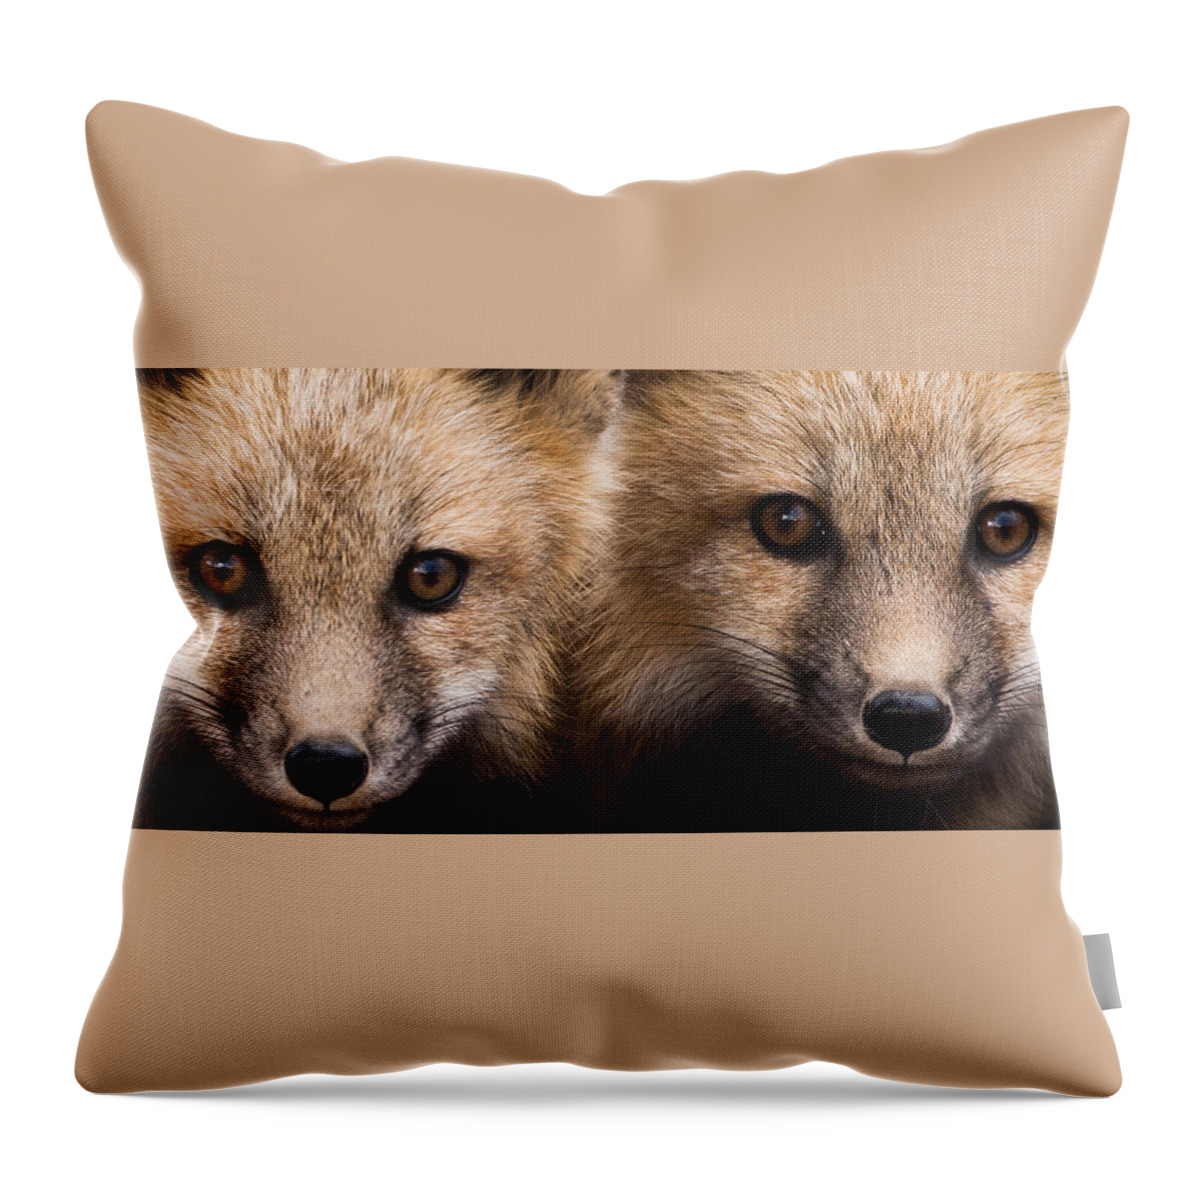 Red Fox Throw Pillow featuring the photograph Two Fox Kits by Mindy Musick King